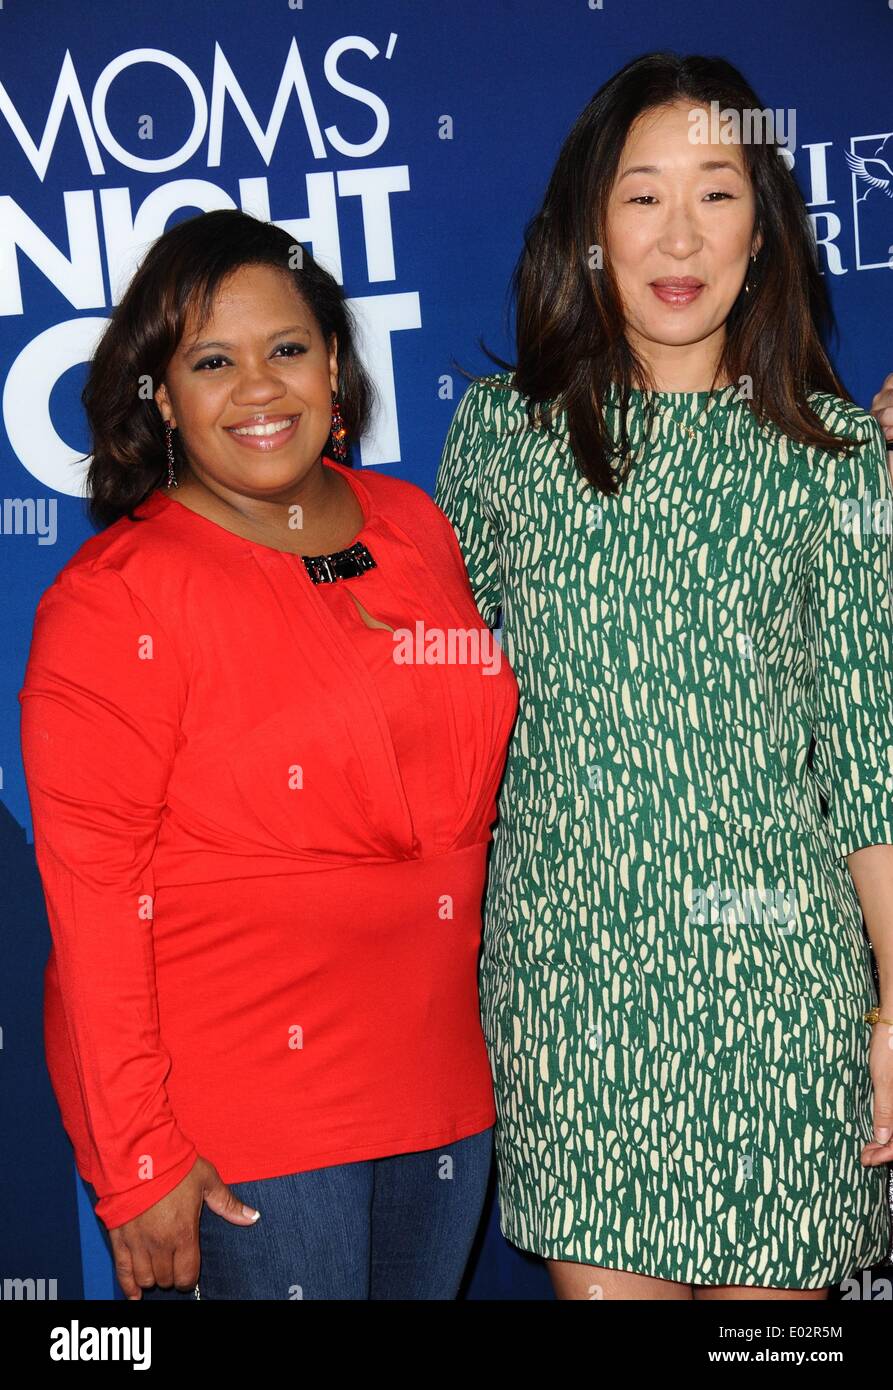 Los Angeles, CA, USA. 29th Apr, 2014. Chandra Wilson, Sandra Oh at arrivals for MOM'S NIGHT OUT Premiere, TCL Chinese 6 Theatres (formerly Grauman's), Los Angeles, CA April 29, 2014. Credit:  Dee Cercone/Everett Collection/Alamy Live News Stock Photo